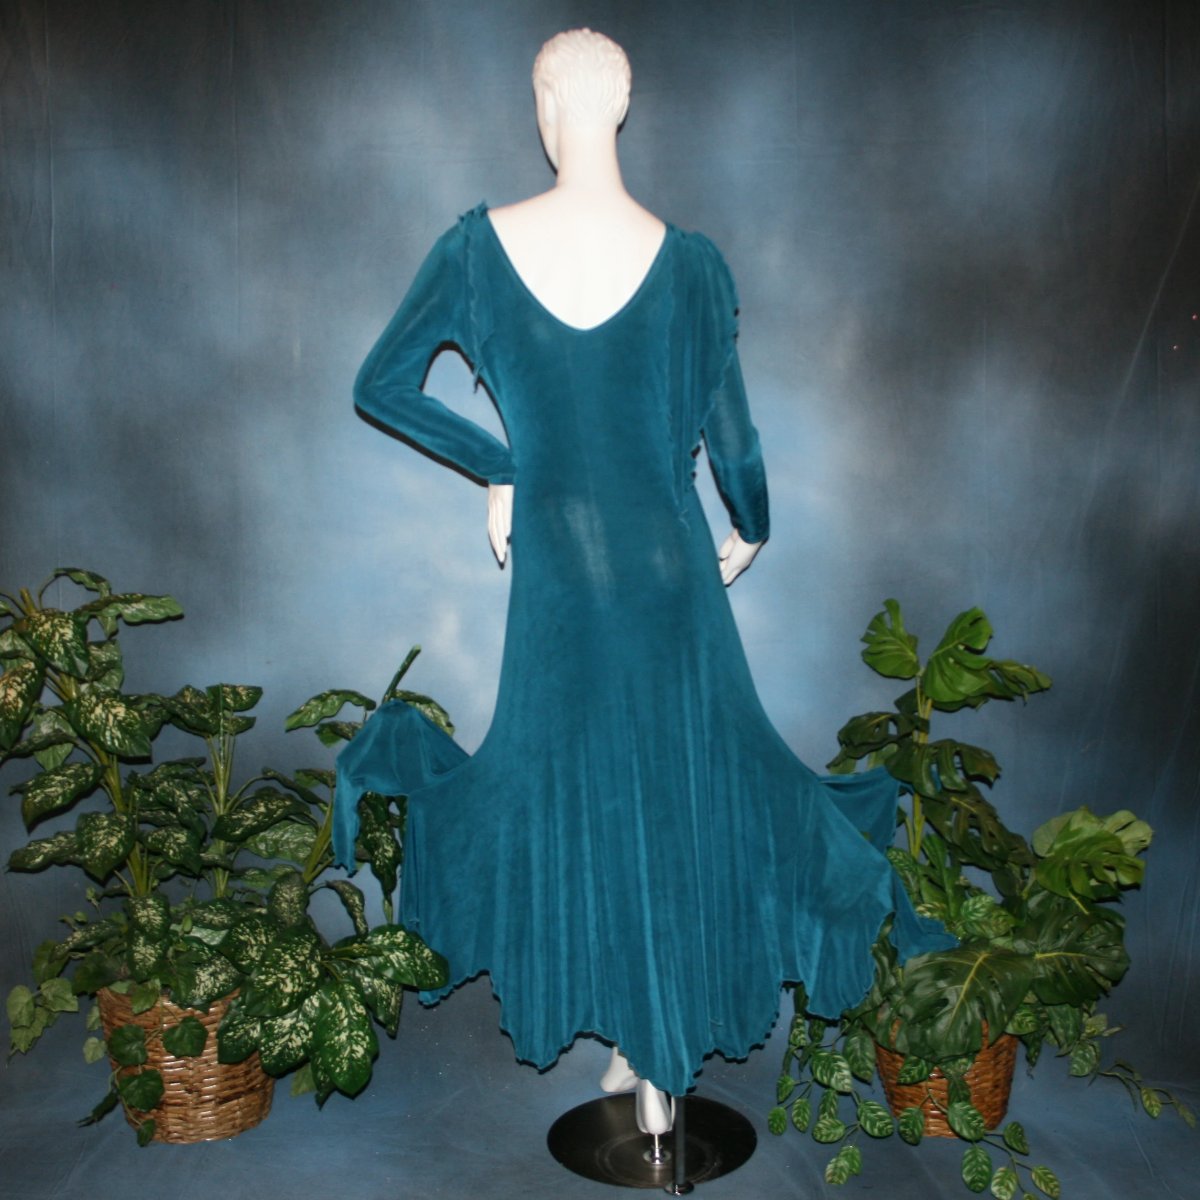 back view of Blue social ballroom dress created in deep blue luxurious solid slinky fabric with attached draping on shoulders & scalloped skirt edge. Very full around bottom & can be a beginner ballroom dancer smooth dress.